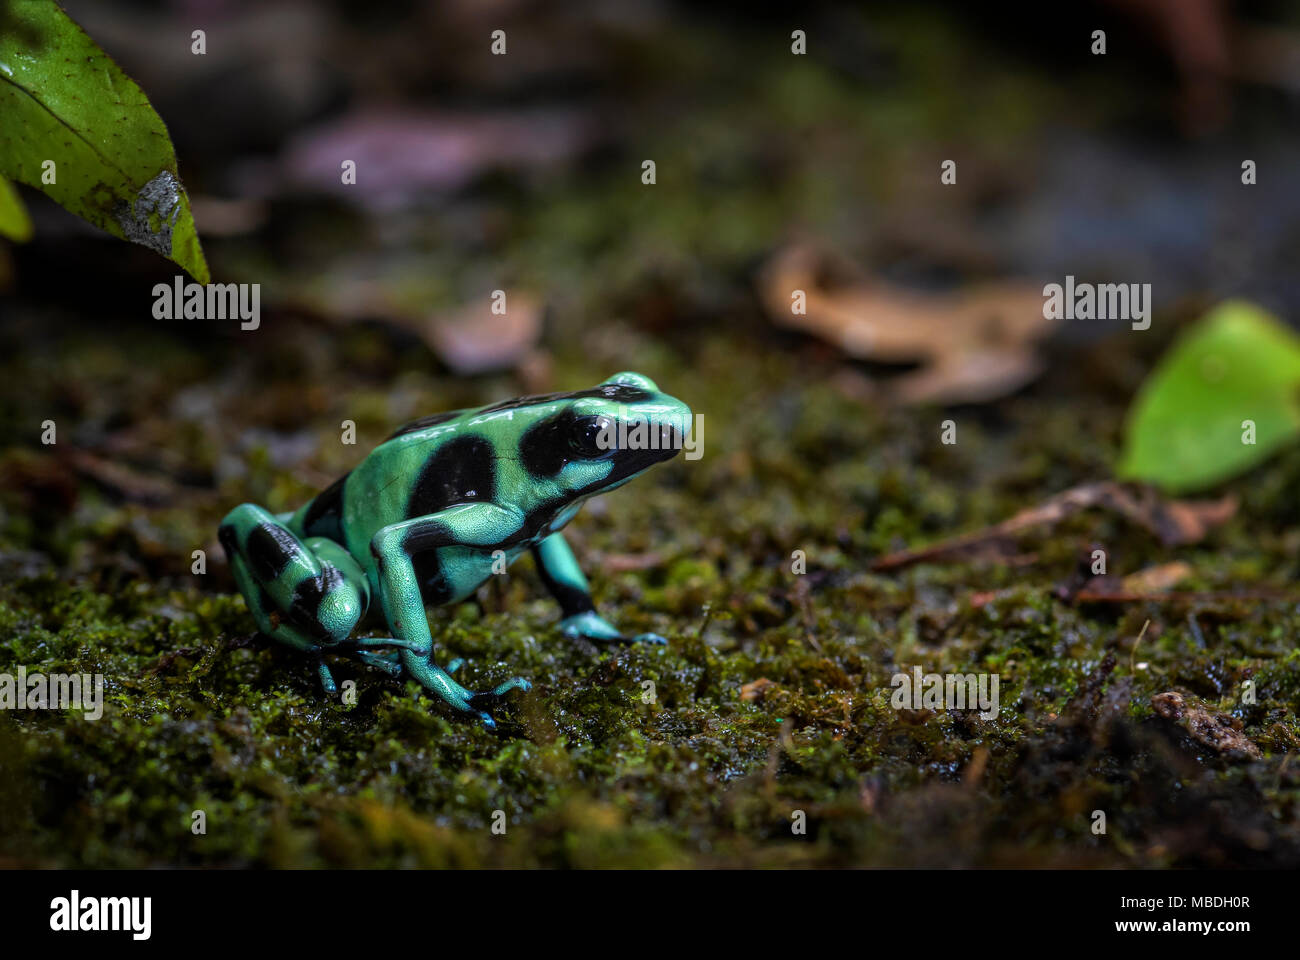 Dart Poison Frog - Dendrobates auratus, green and black frog from Cental America forest, Costa Rica. Stock Photo